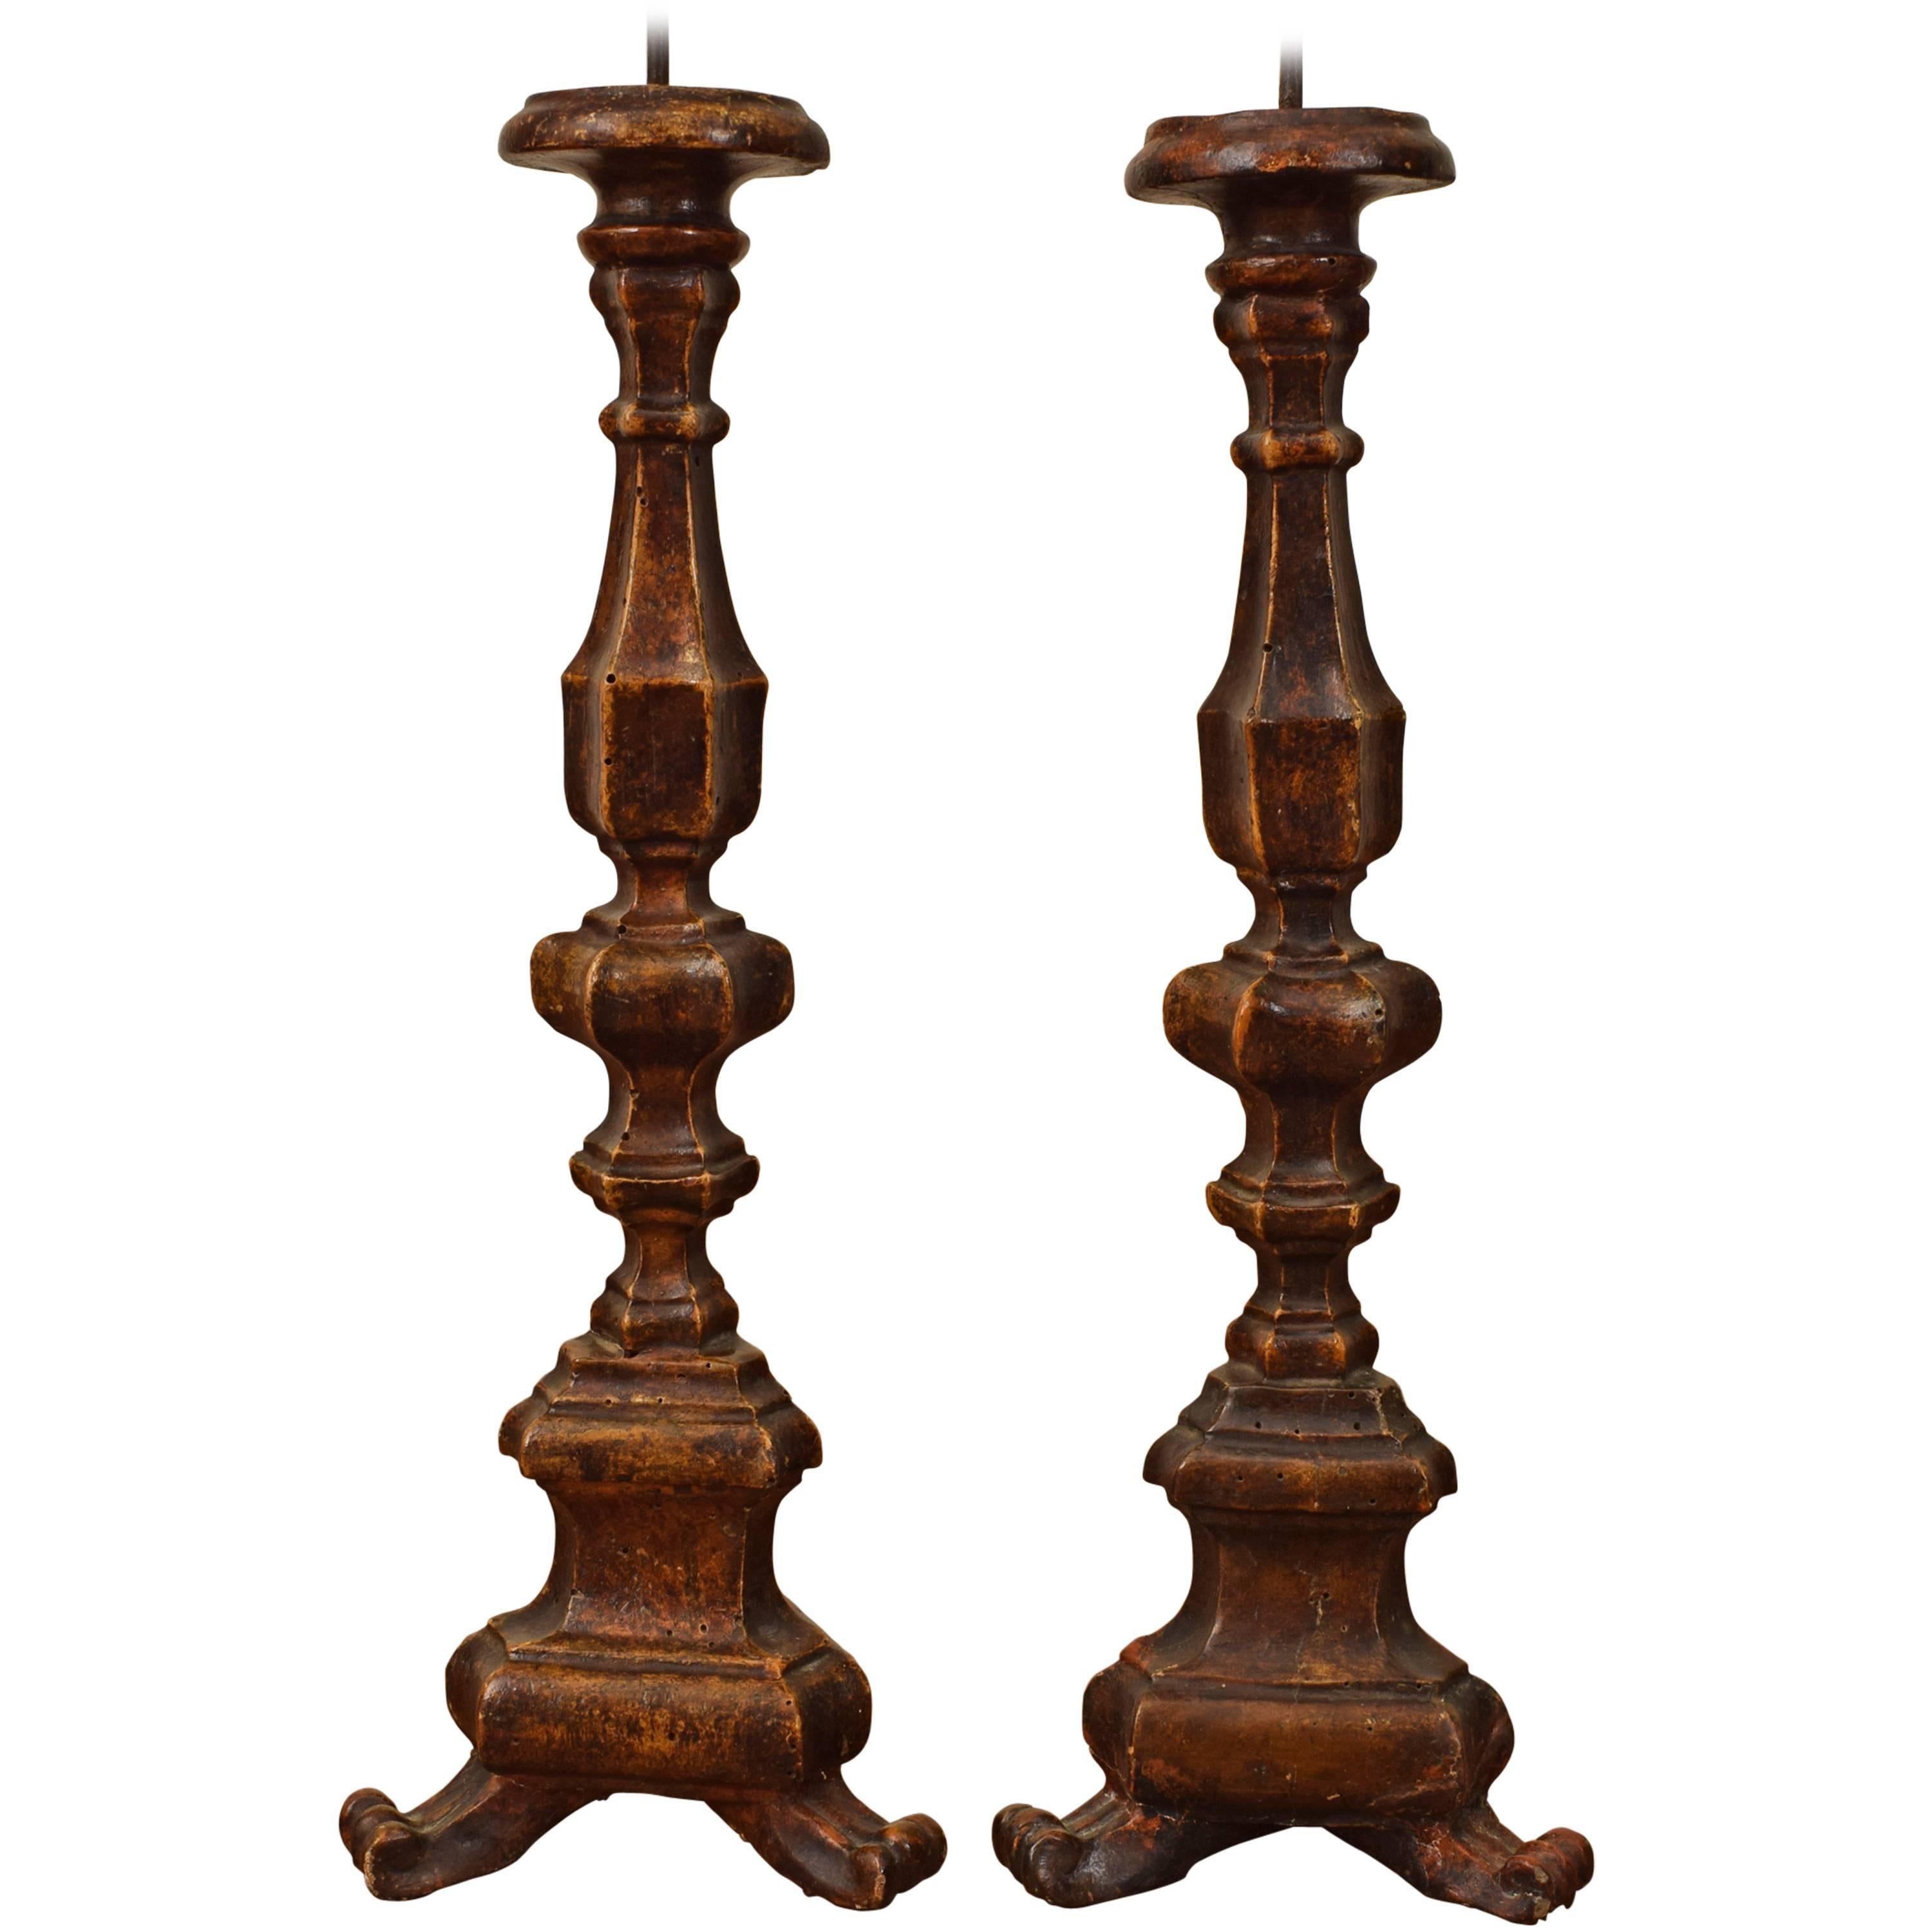 Pair of Early 18th Century Carved Candlesticks in Mecca, Italy